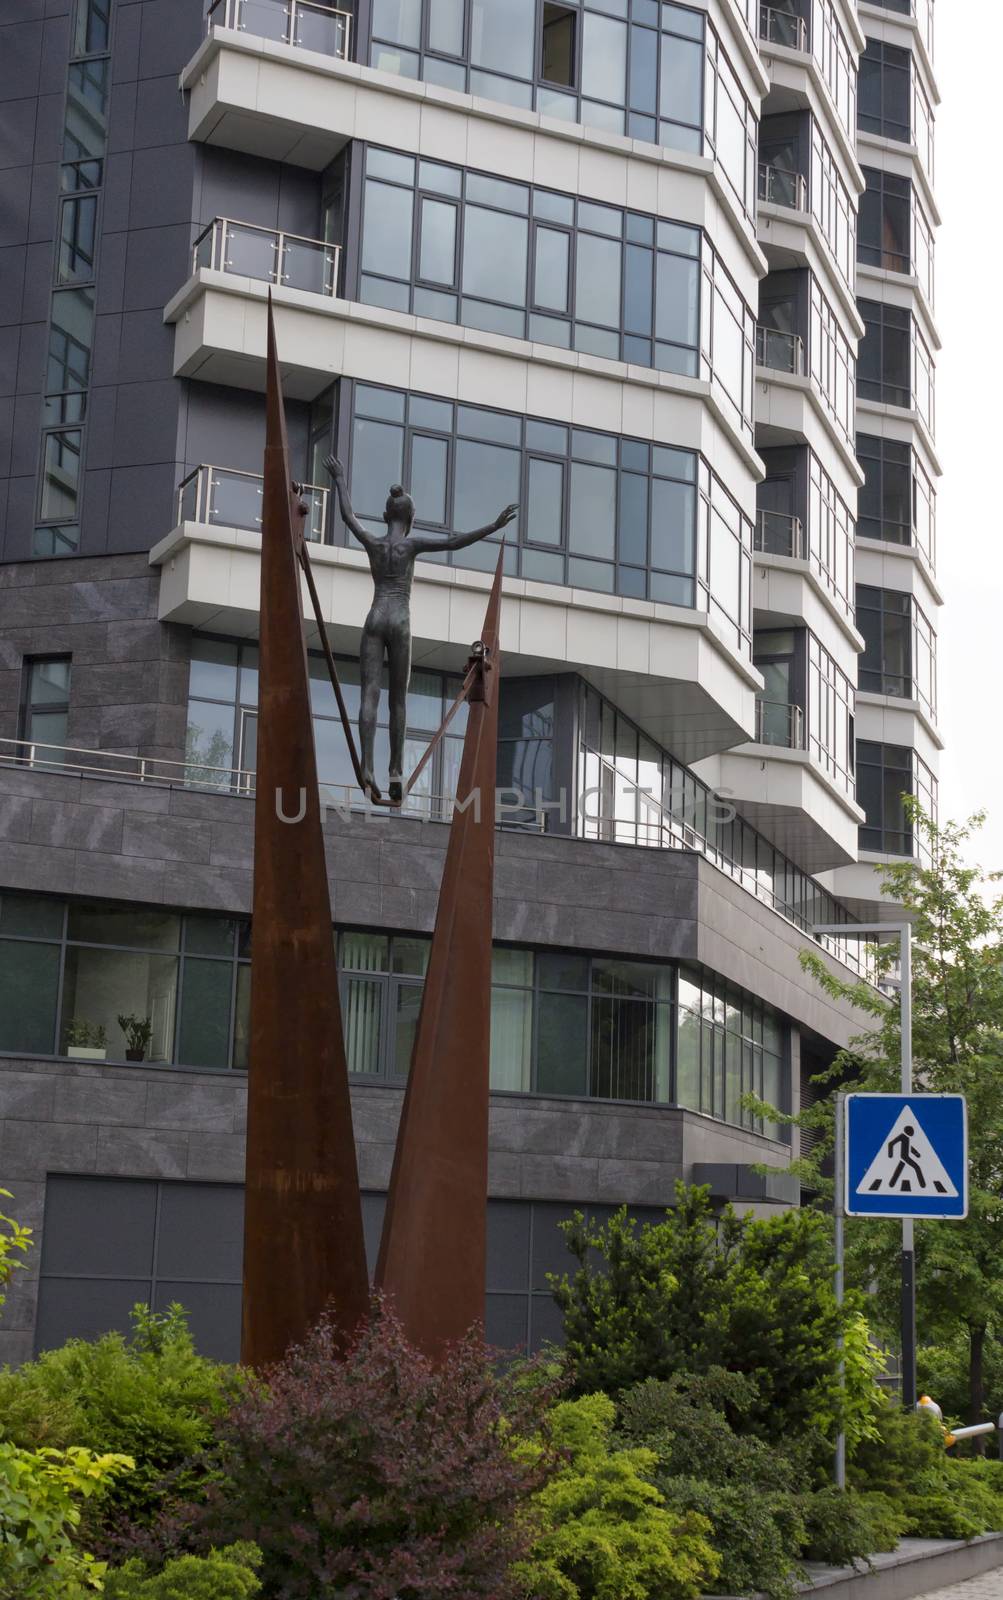 Metal ropewalker girl statue with an office building on the background